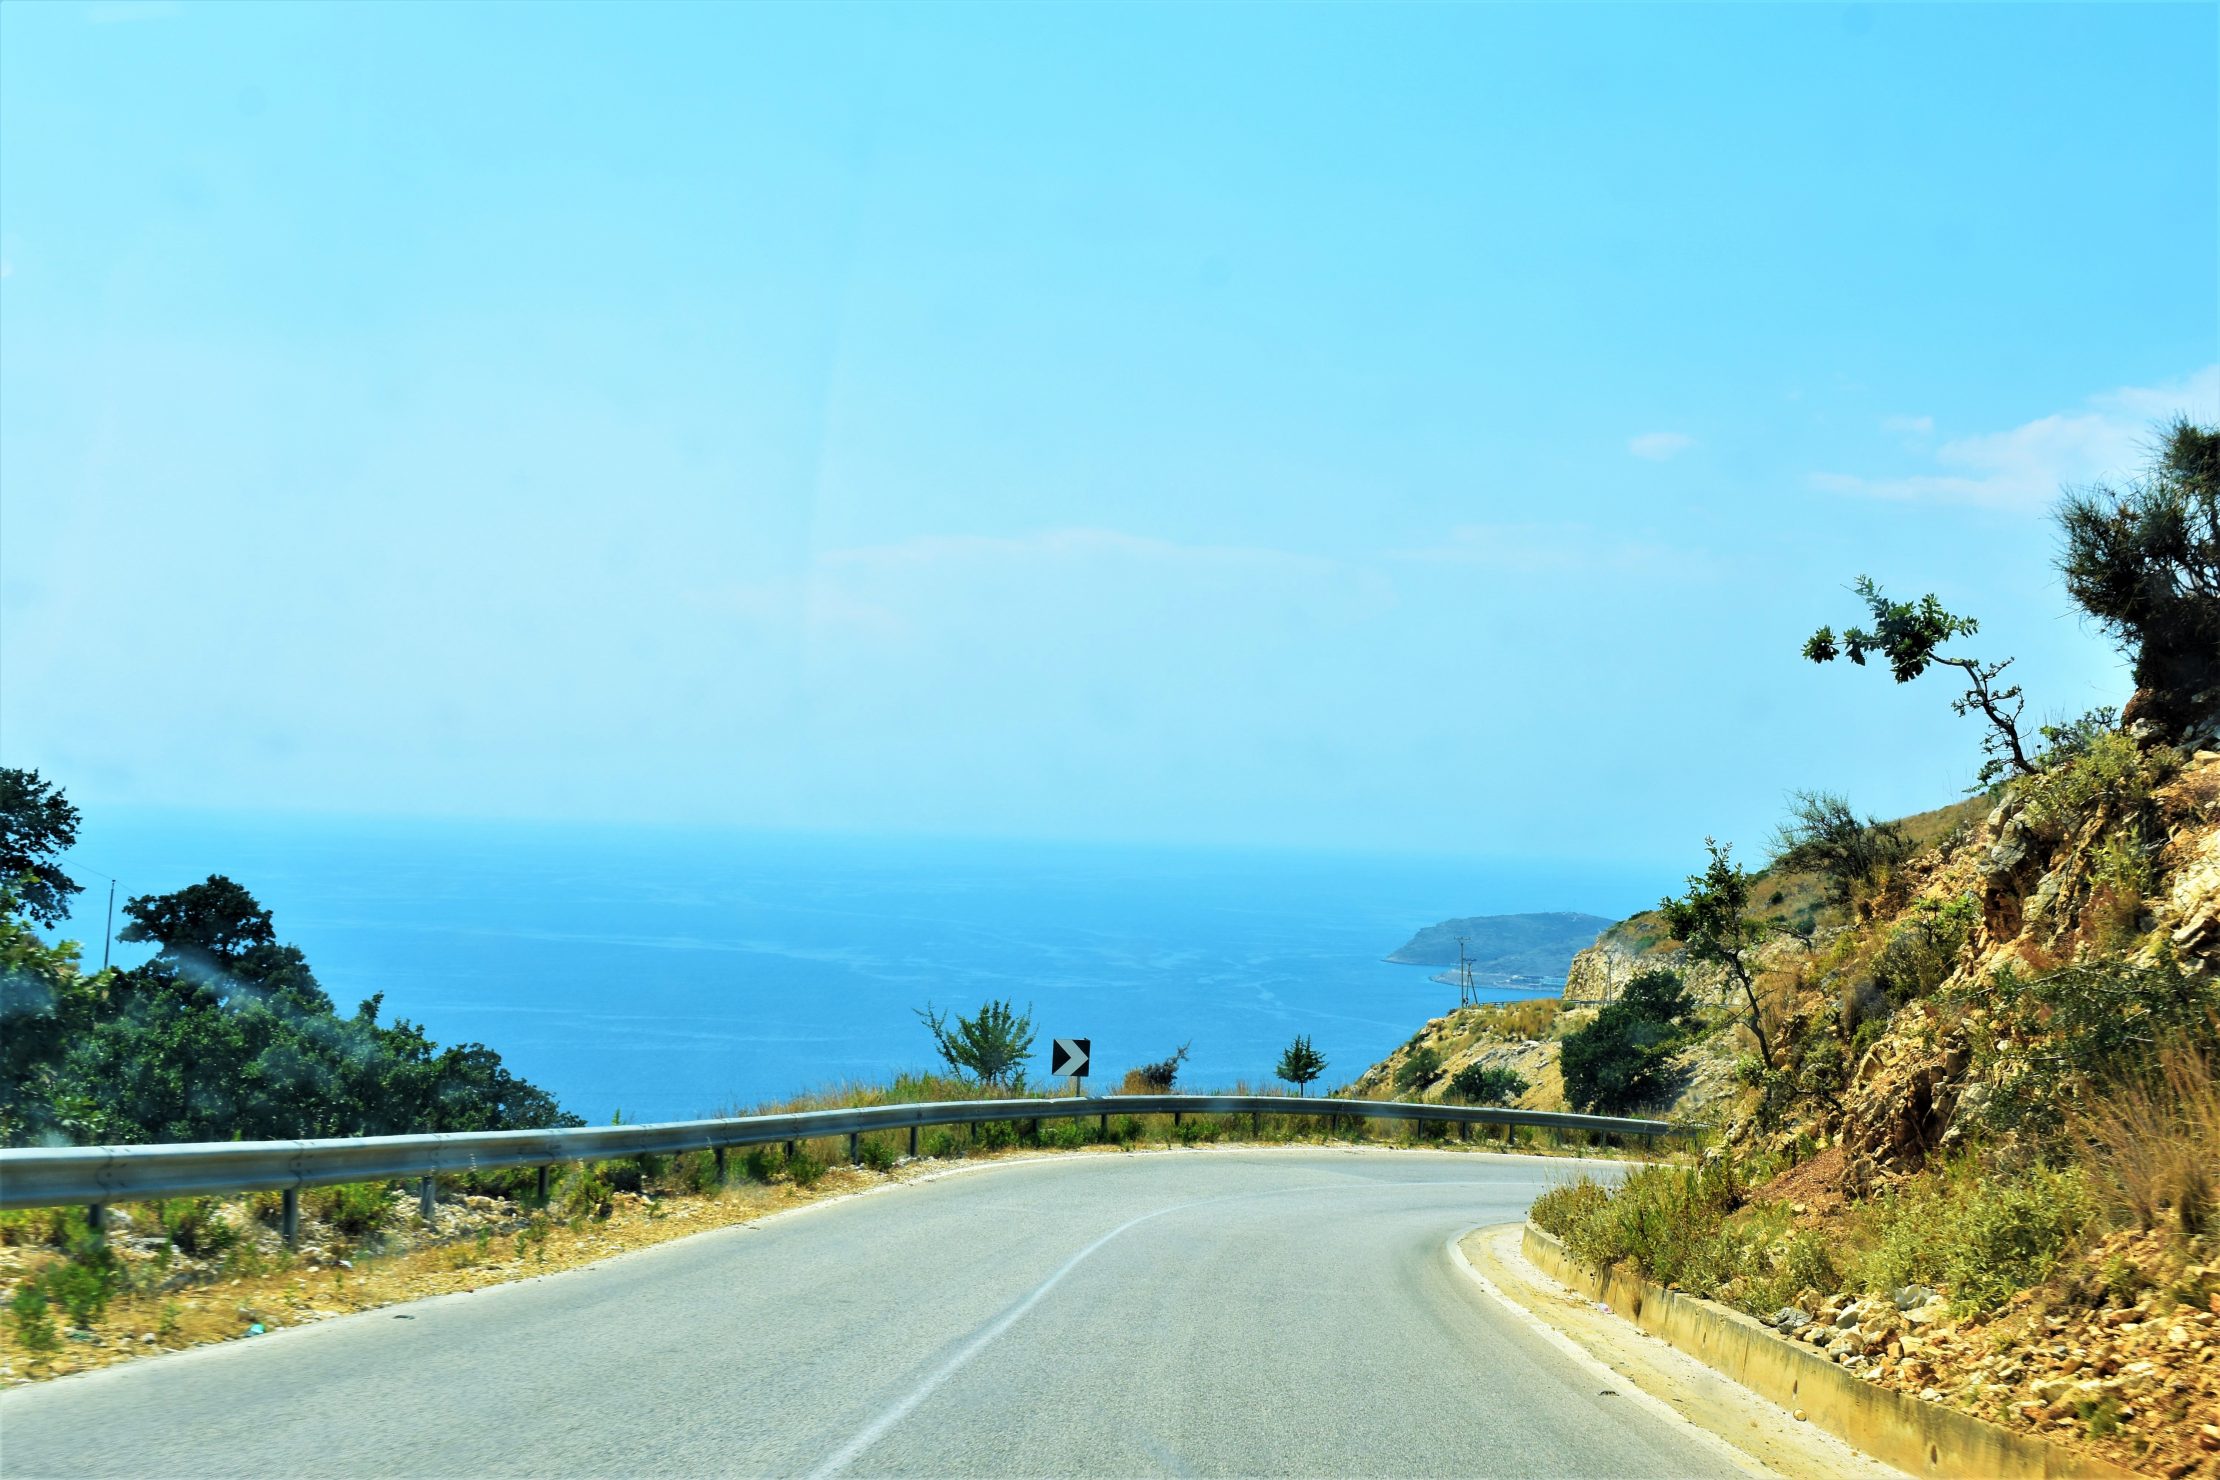 Many Albanian roads are among the most scenic in Europe